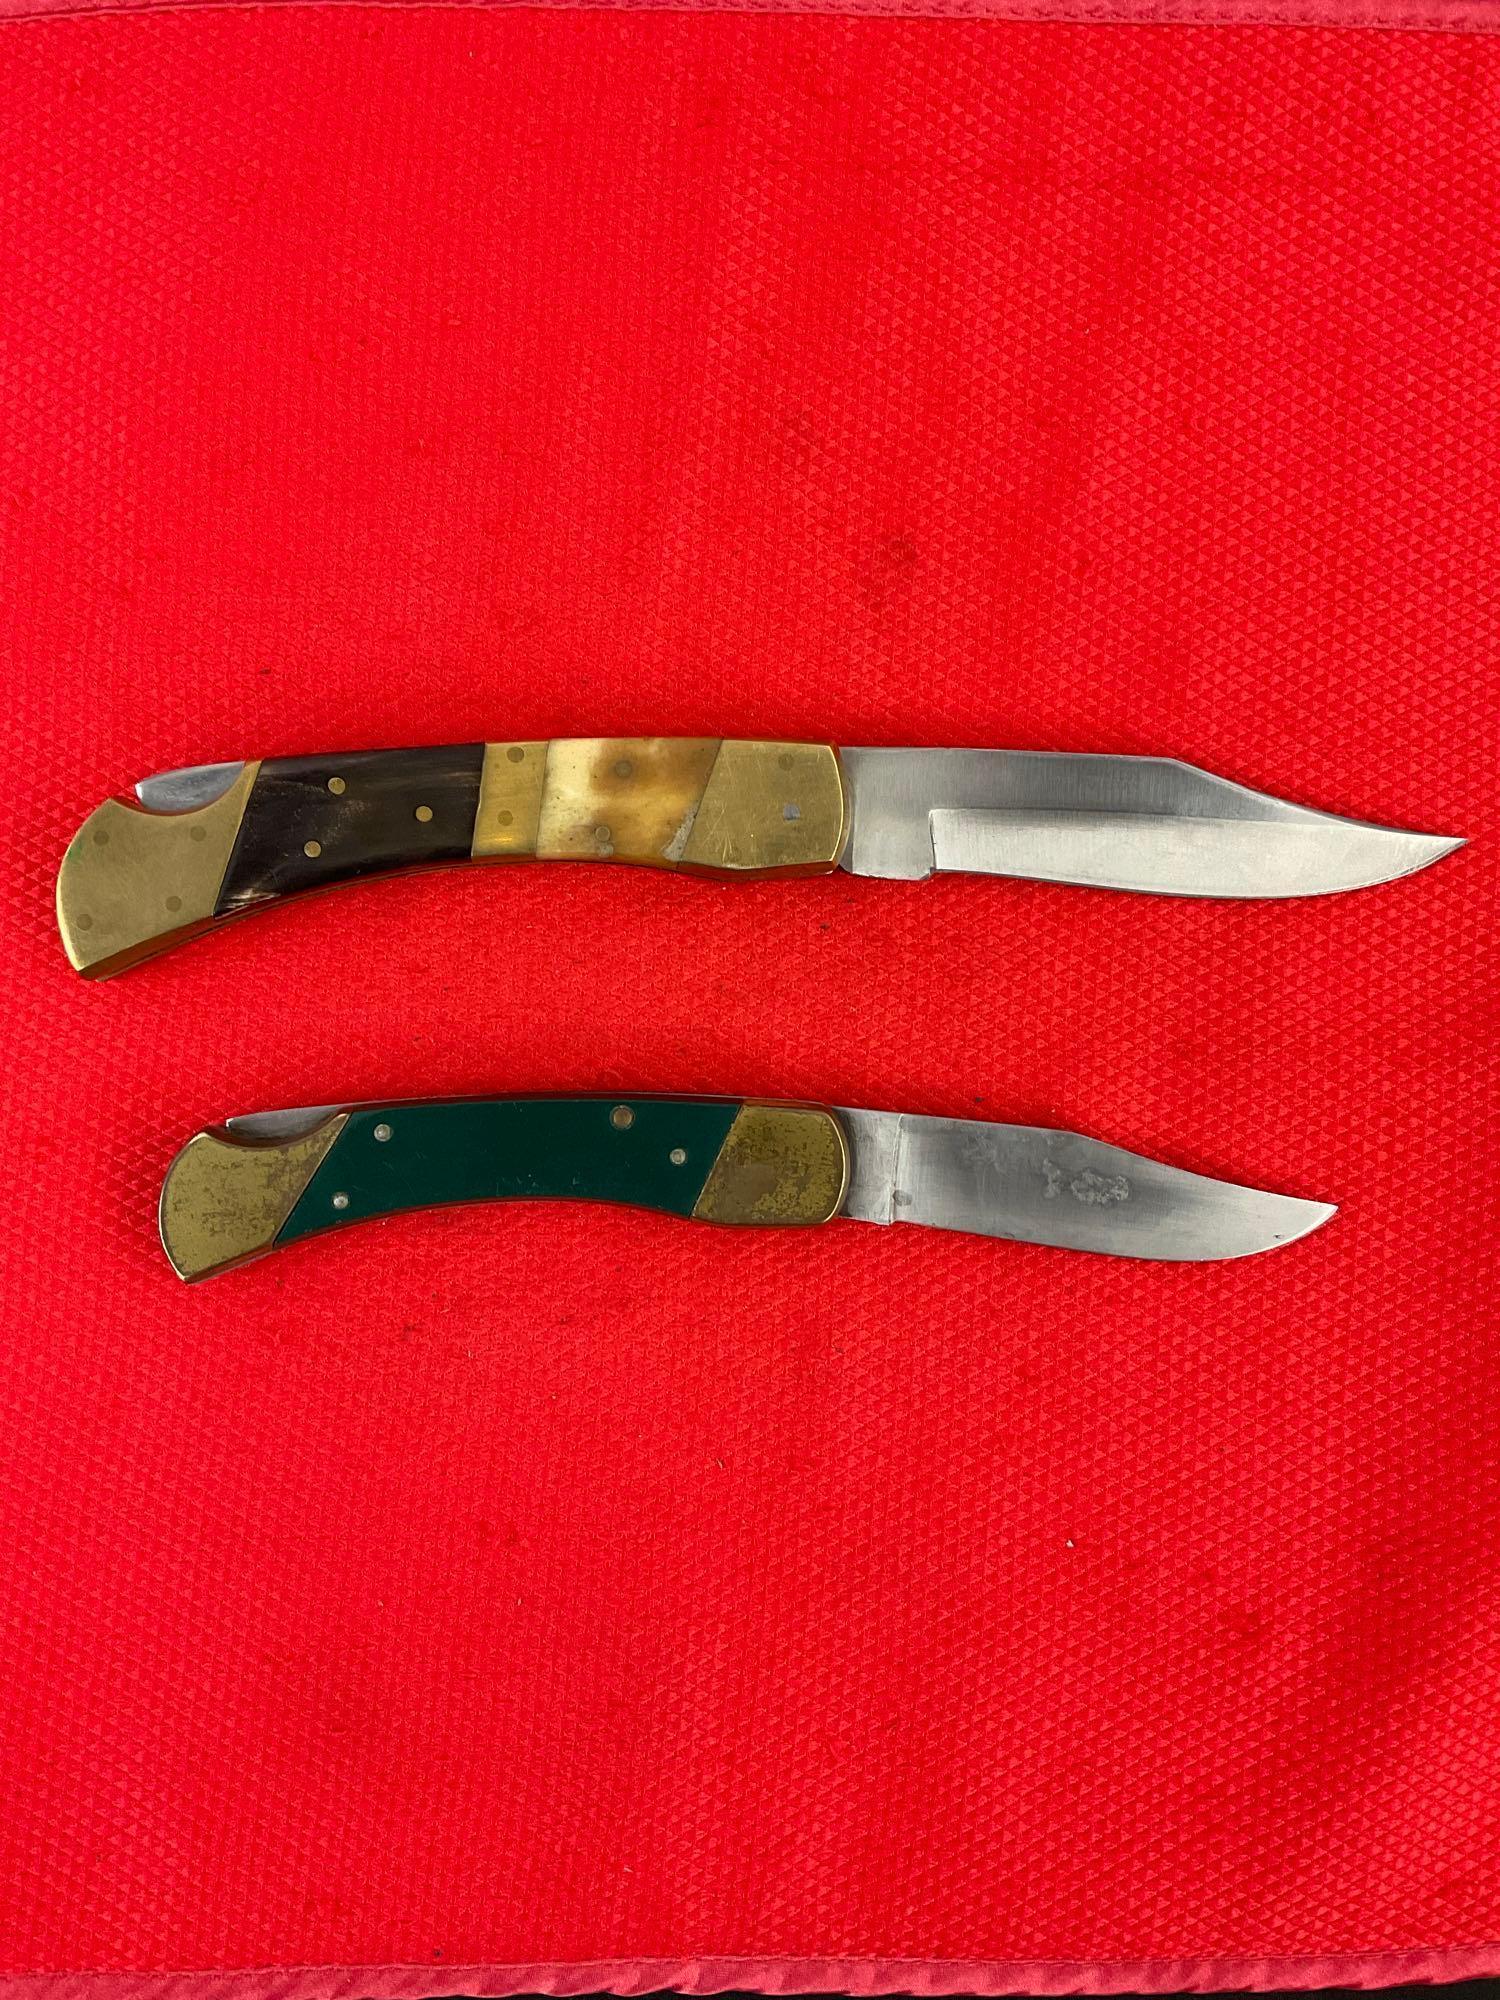 2 pcs Stainless Steel Folding Blade Pocket Hunting Knives. Vintage Coyote 3.5" Knife. See pics.